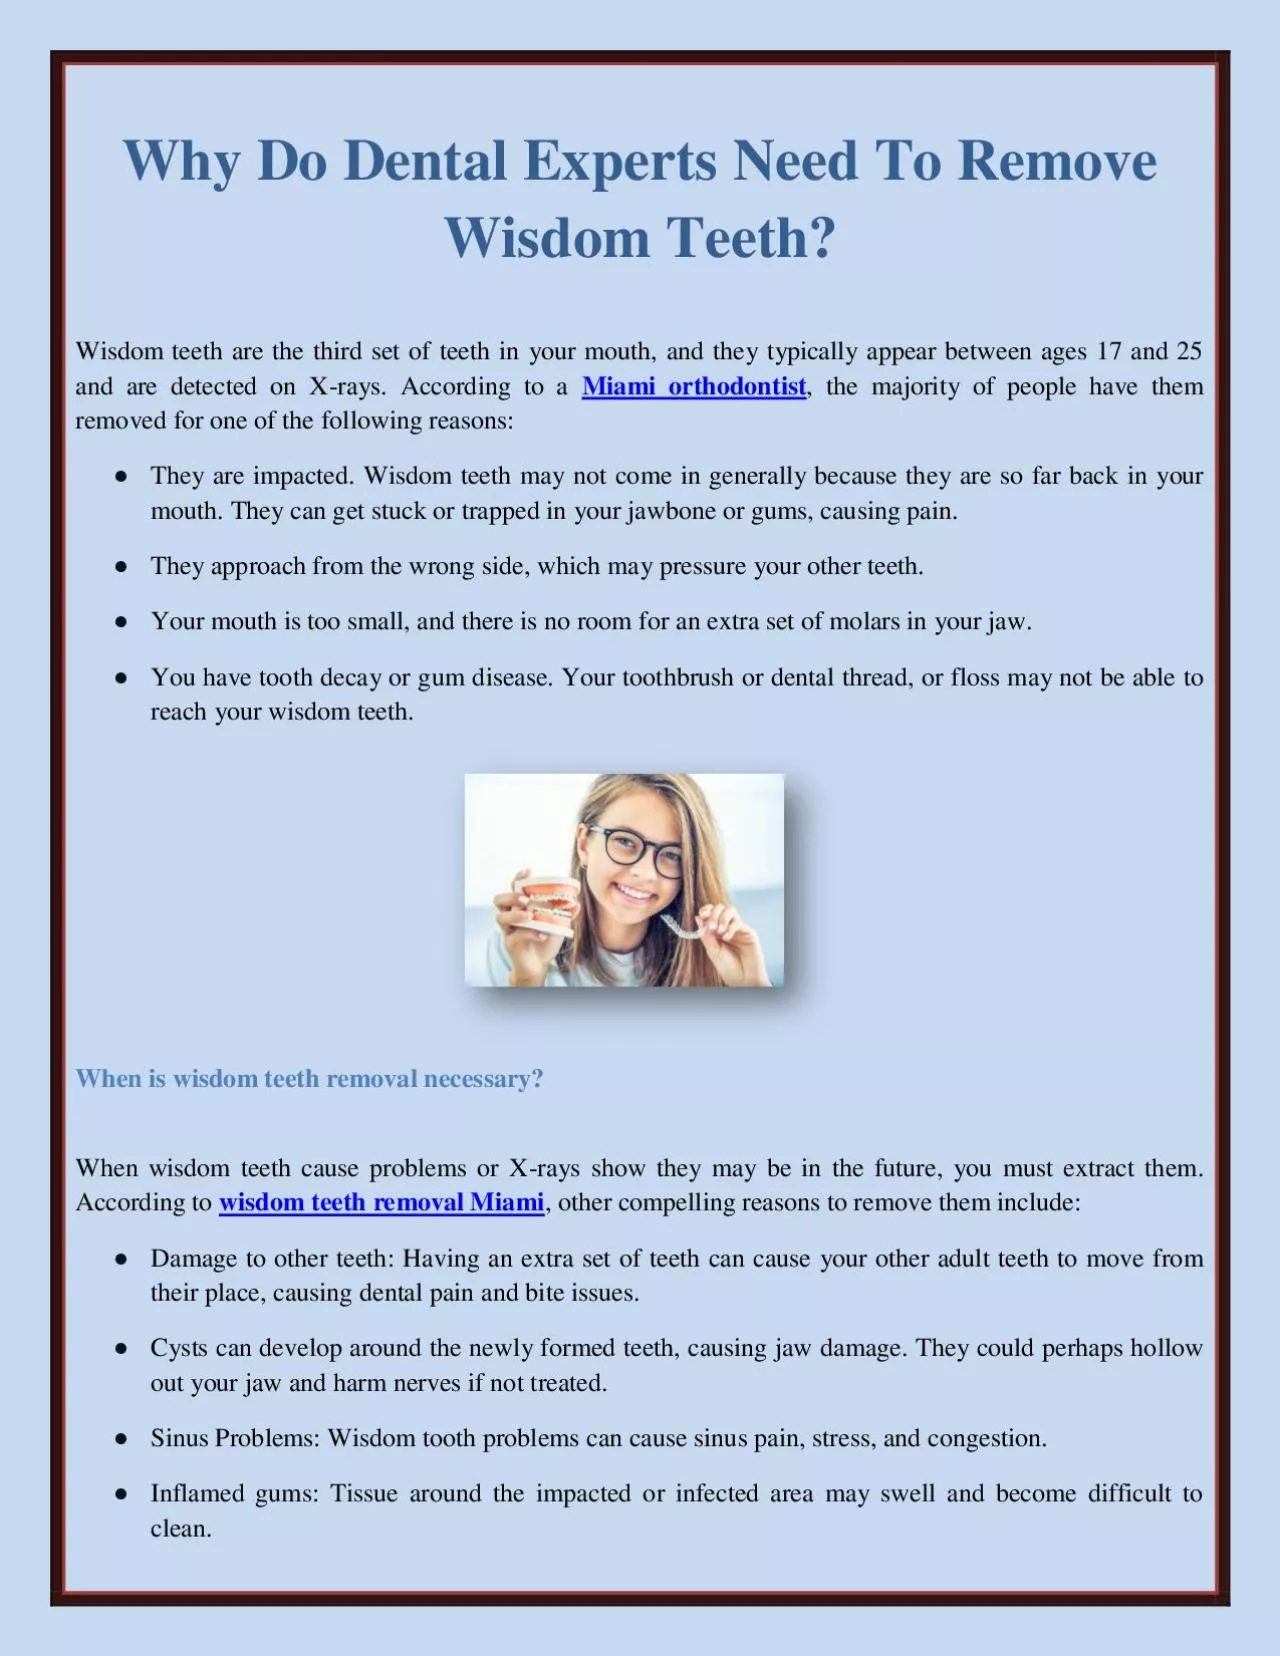 Why Do Dental Experts Need To Remove Wisdom Teeth?